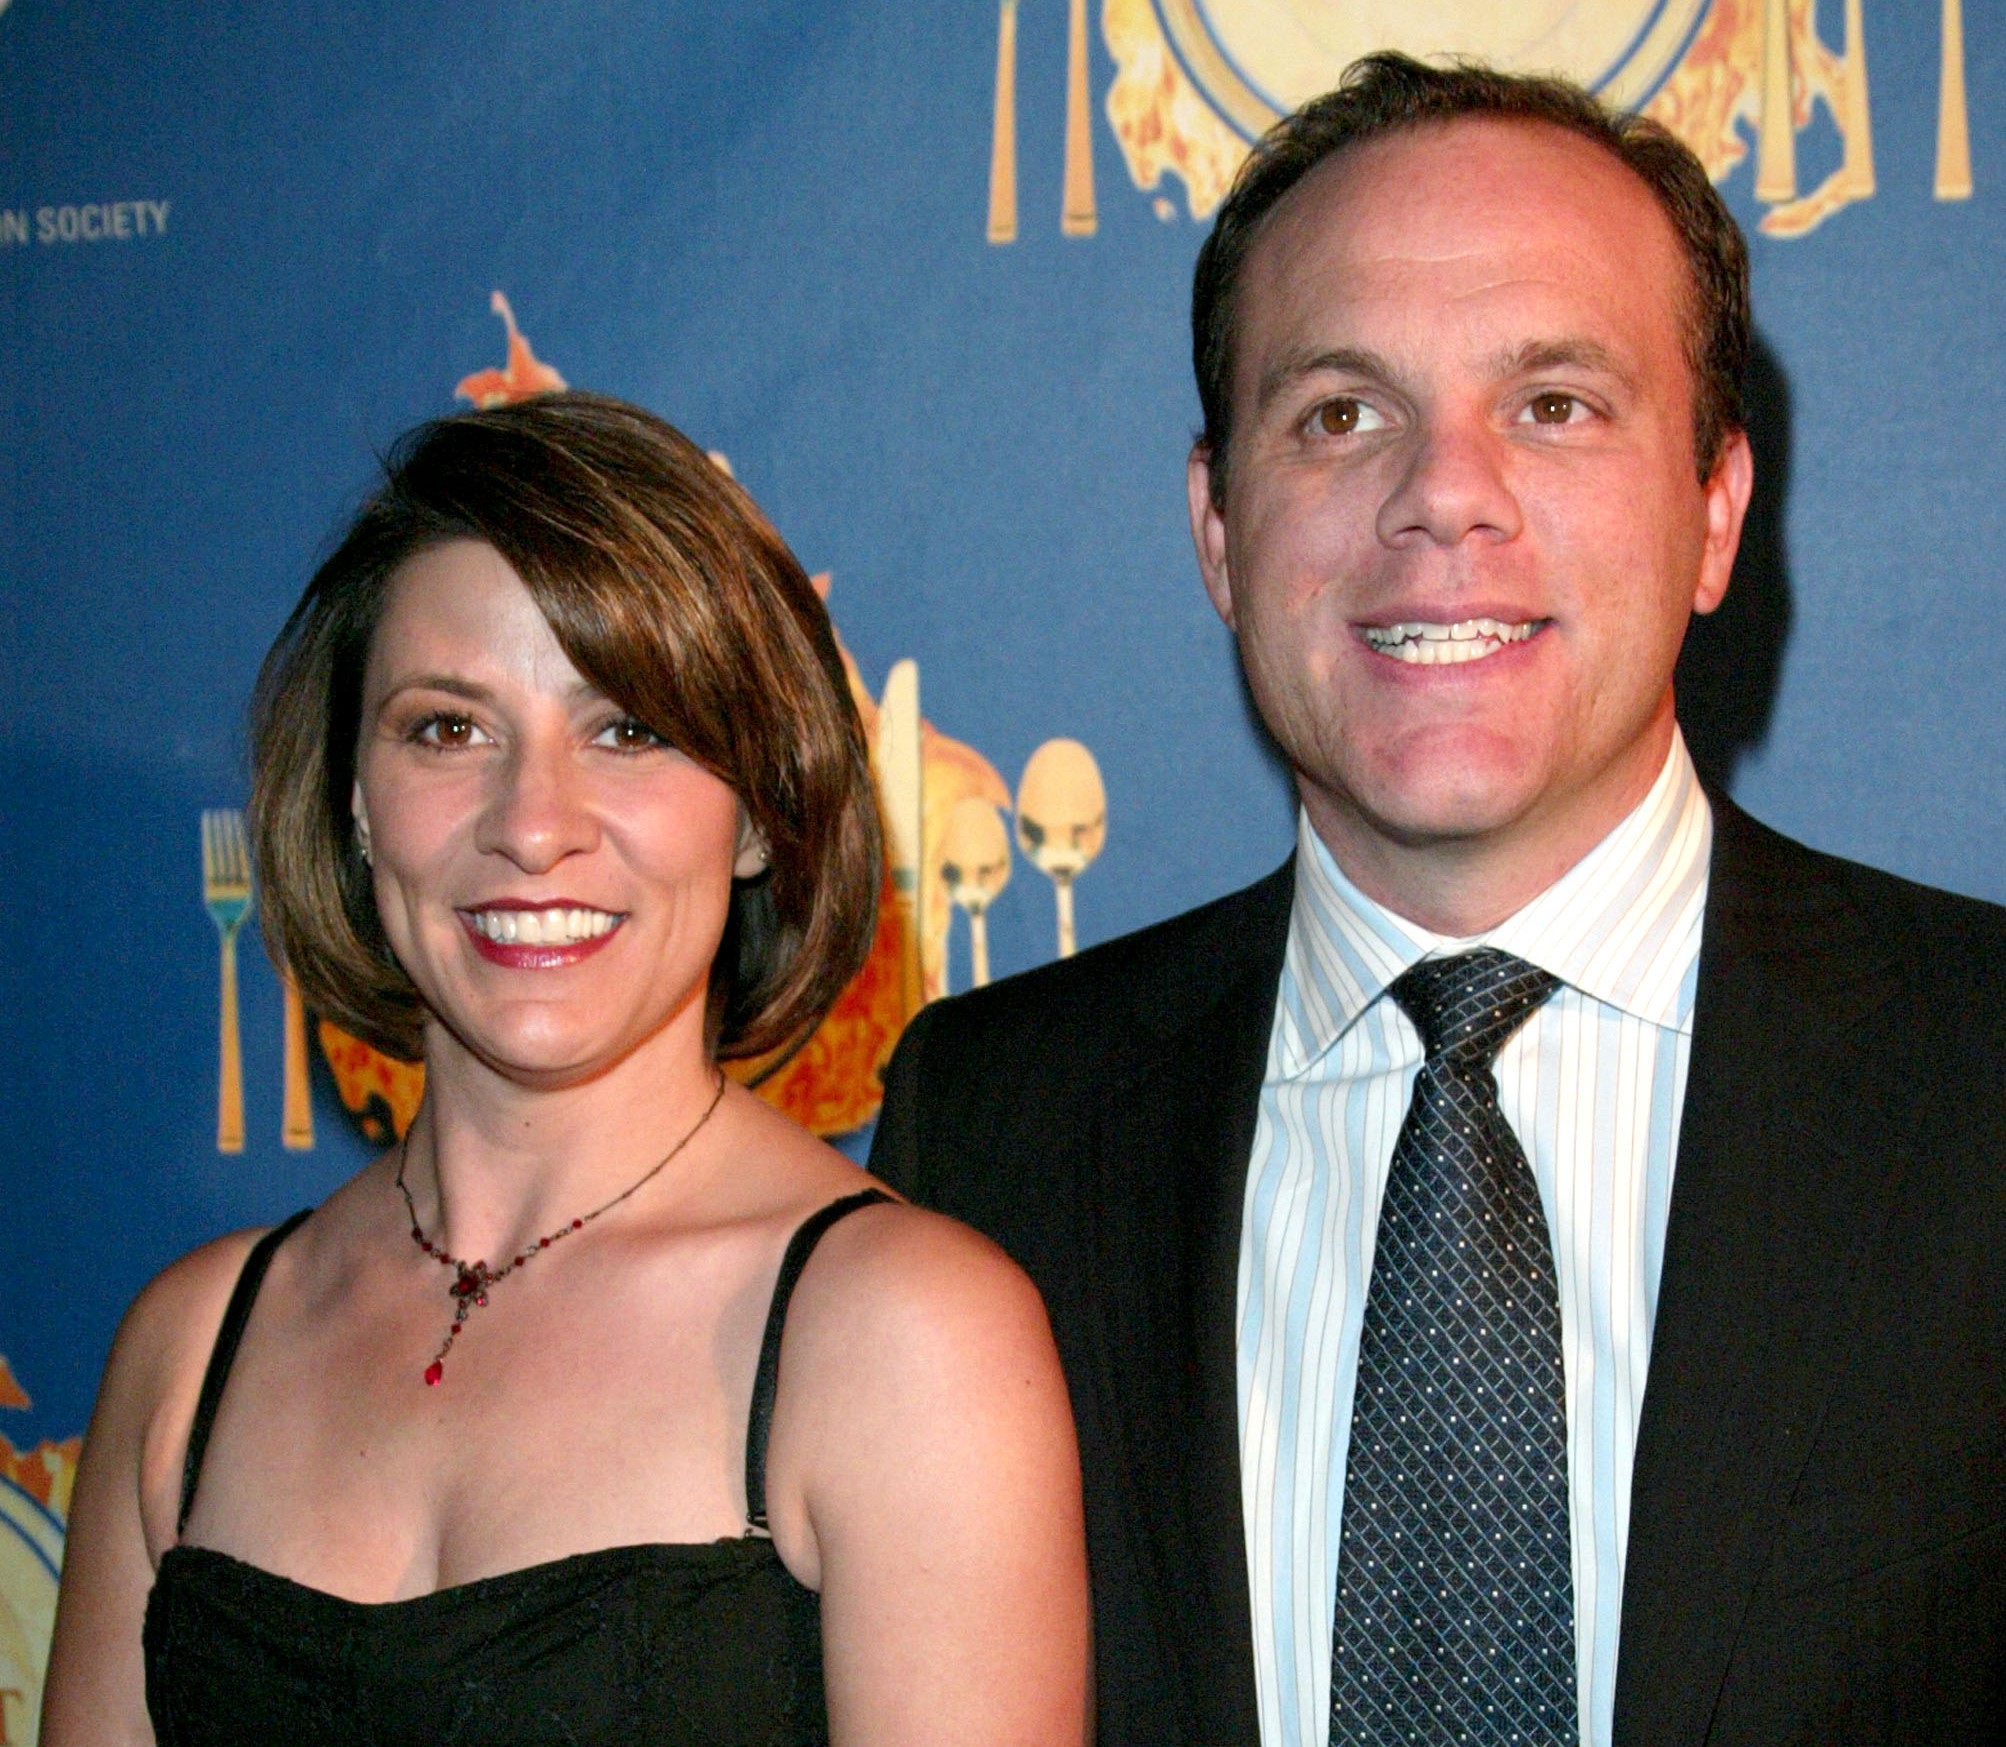 Cynthia Koury-Papa and Tom Papa at the Hollywood Radio And Television Society's 1st Annual Roast In Honor Of Jeff Zucker in 2004, in Century City, California. | Source: Getty Images